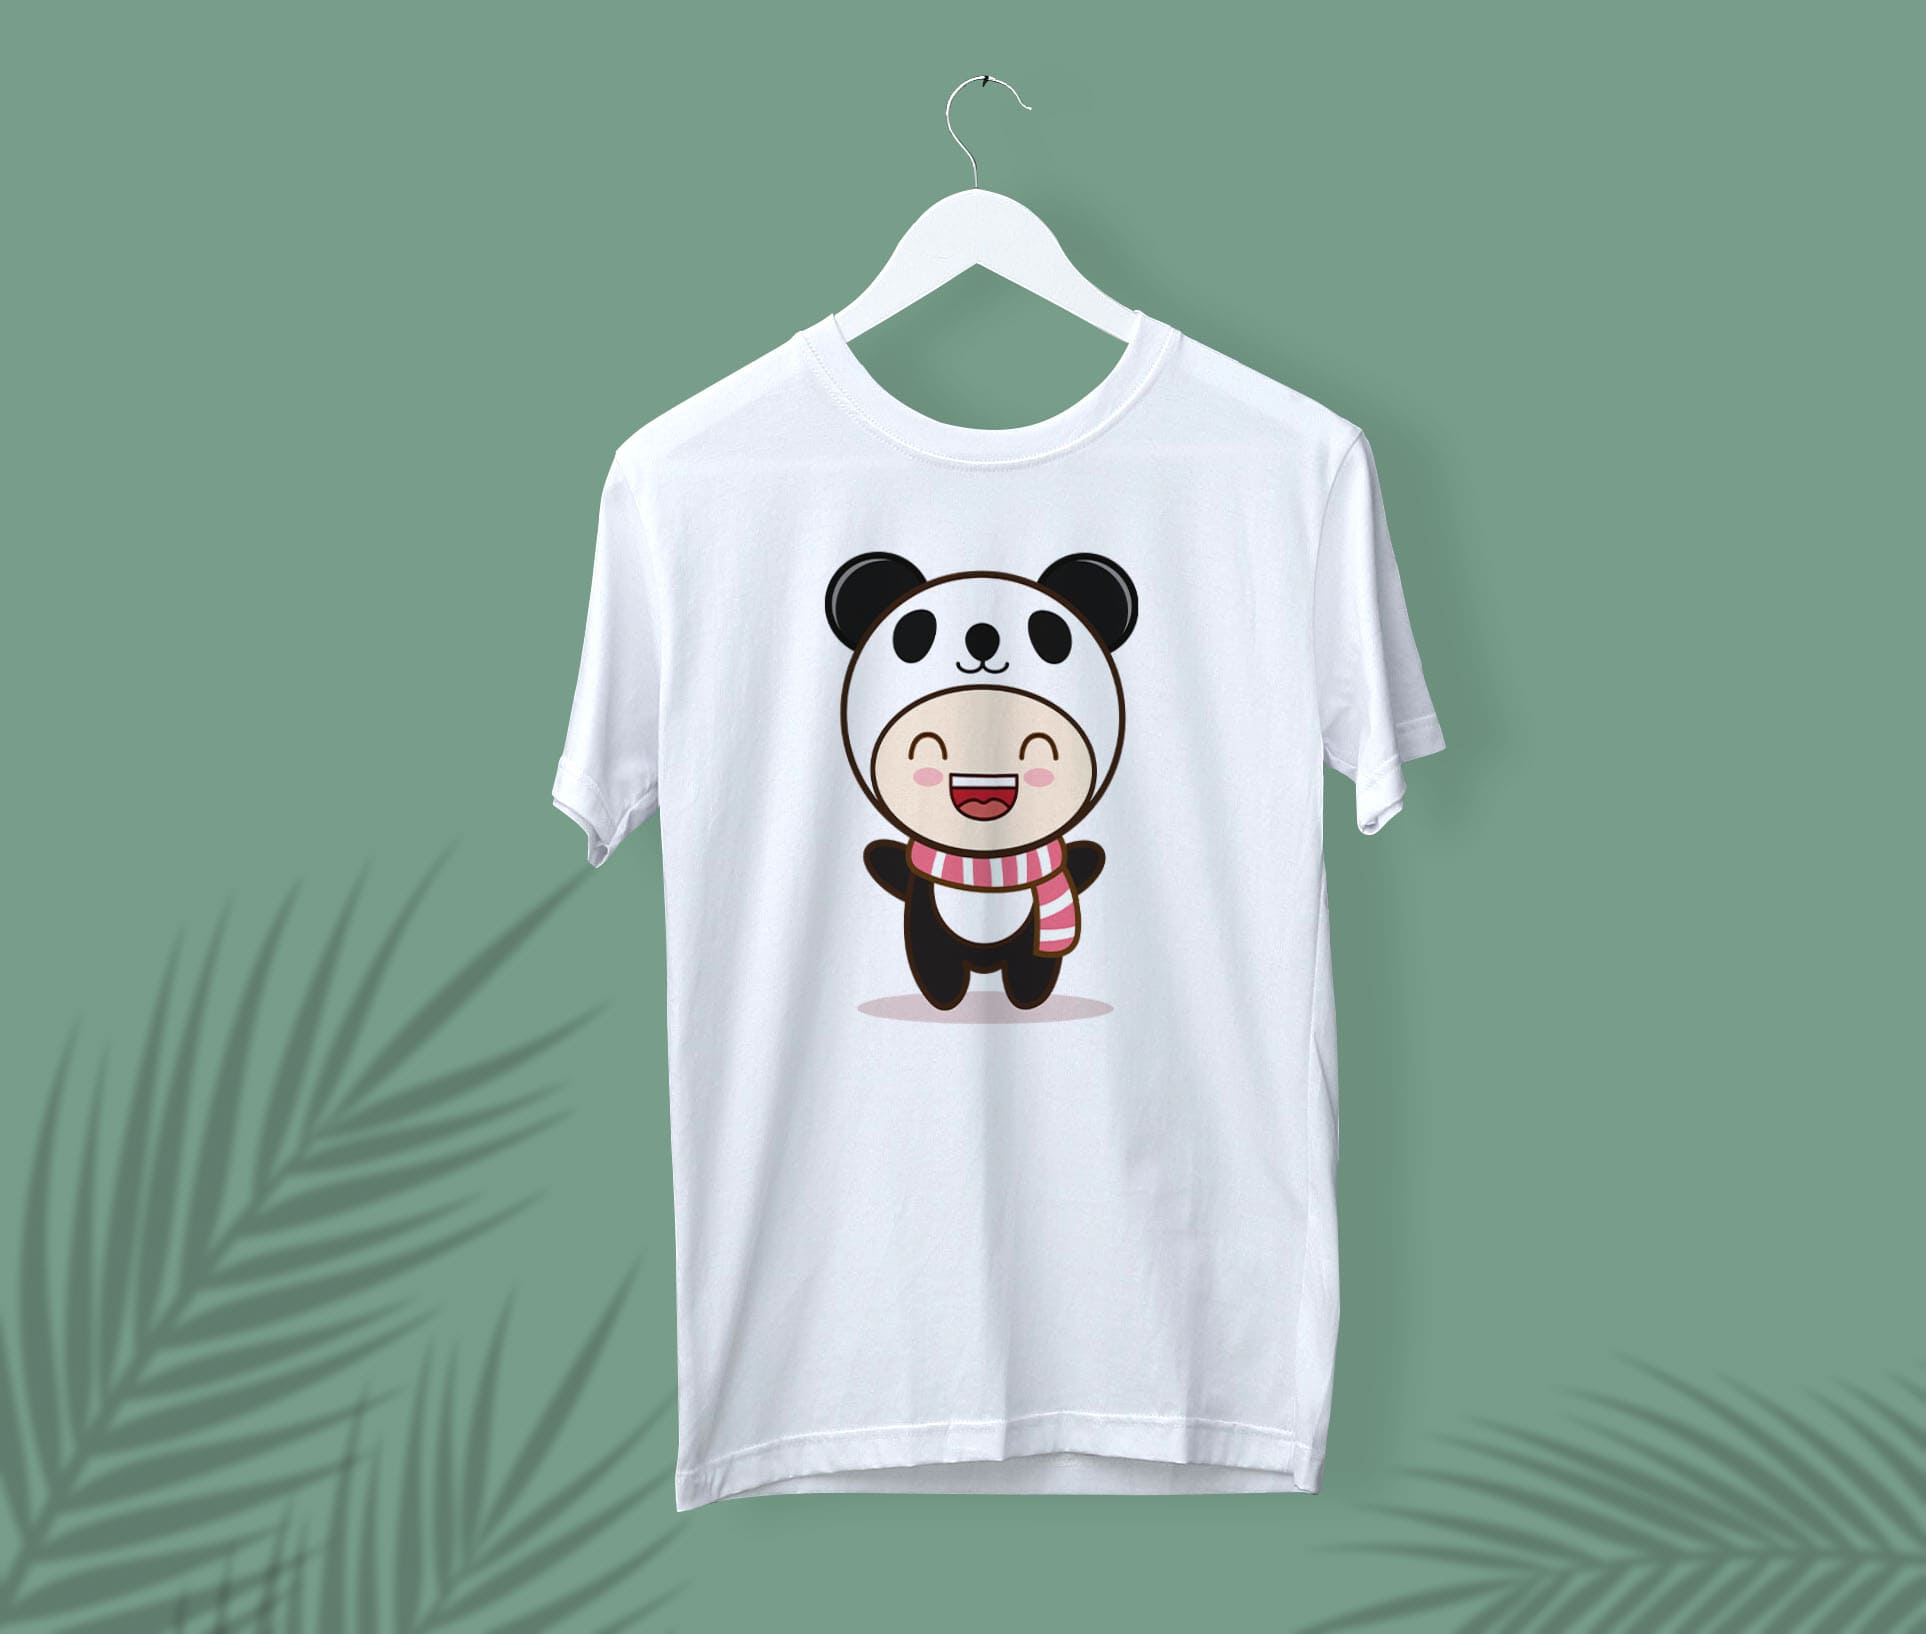 White t-shirt with a laughing girl panda on a white hanger on a turquoise background.